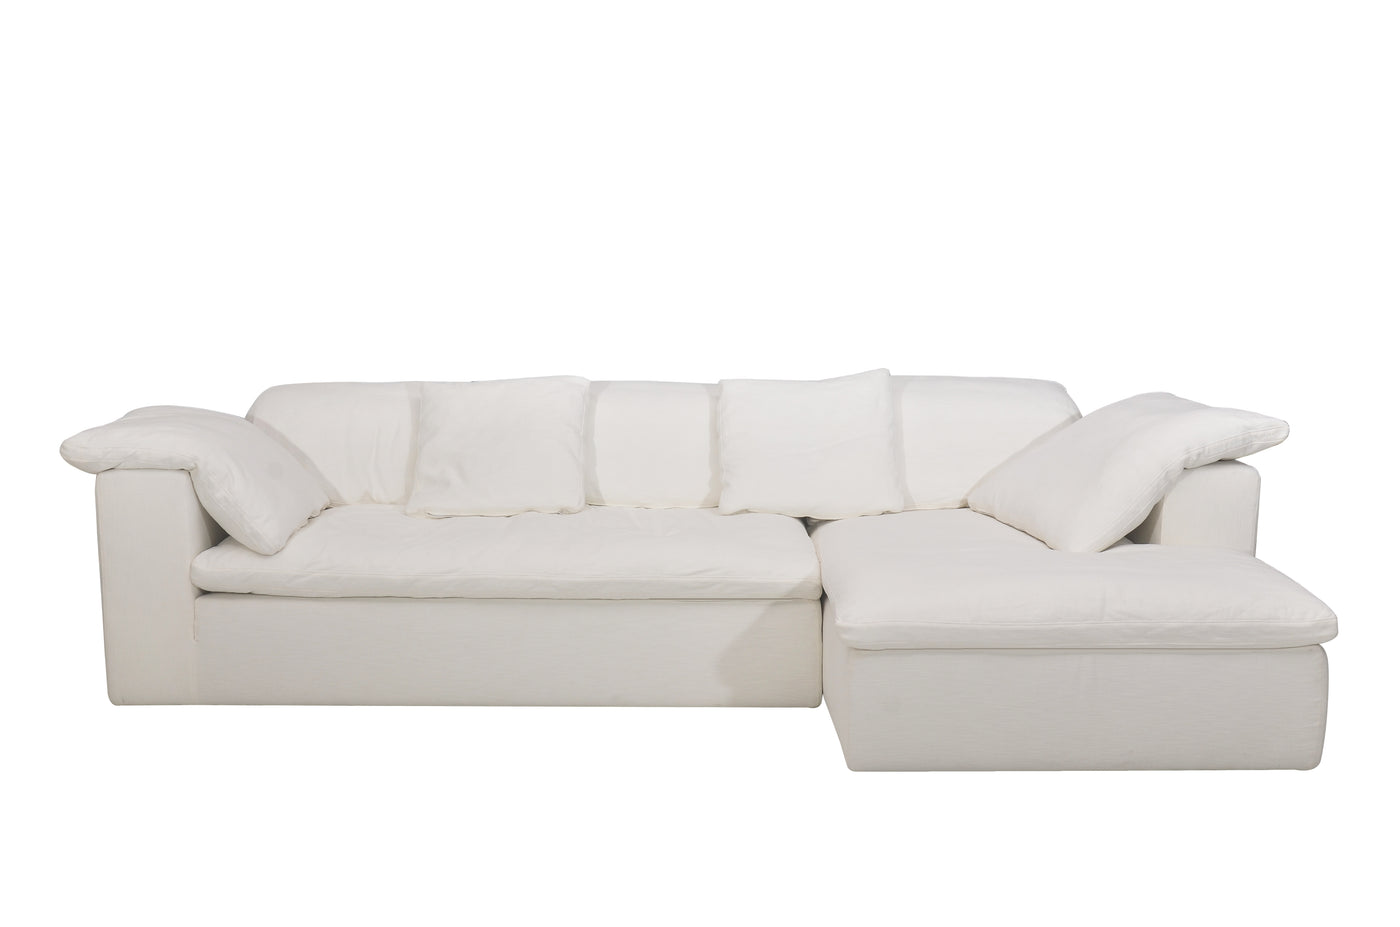 Gemma Sectional - Right facing